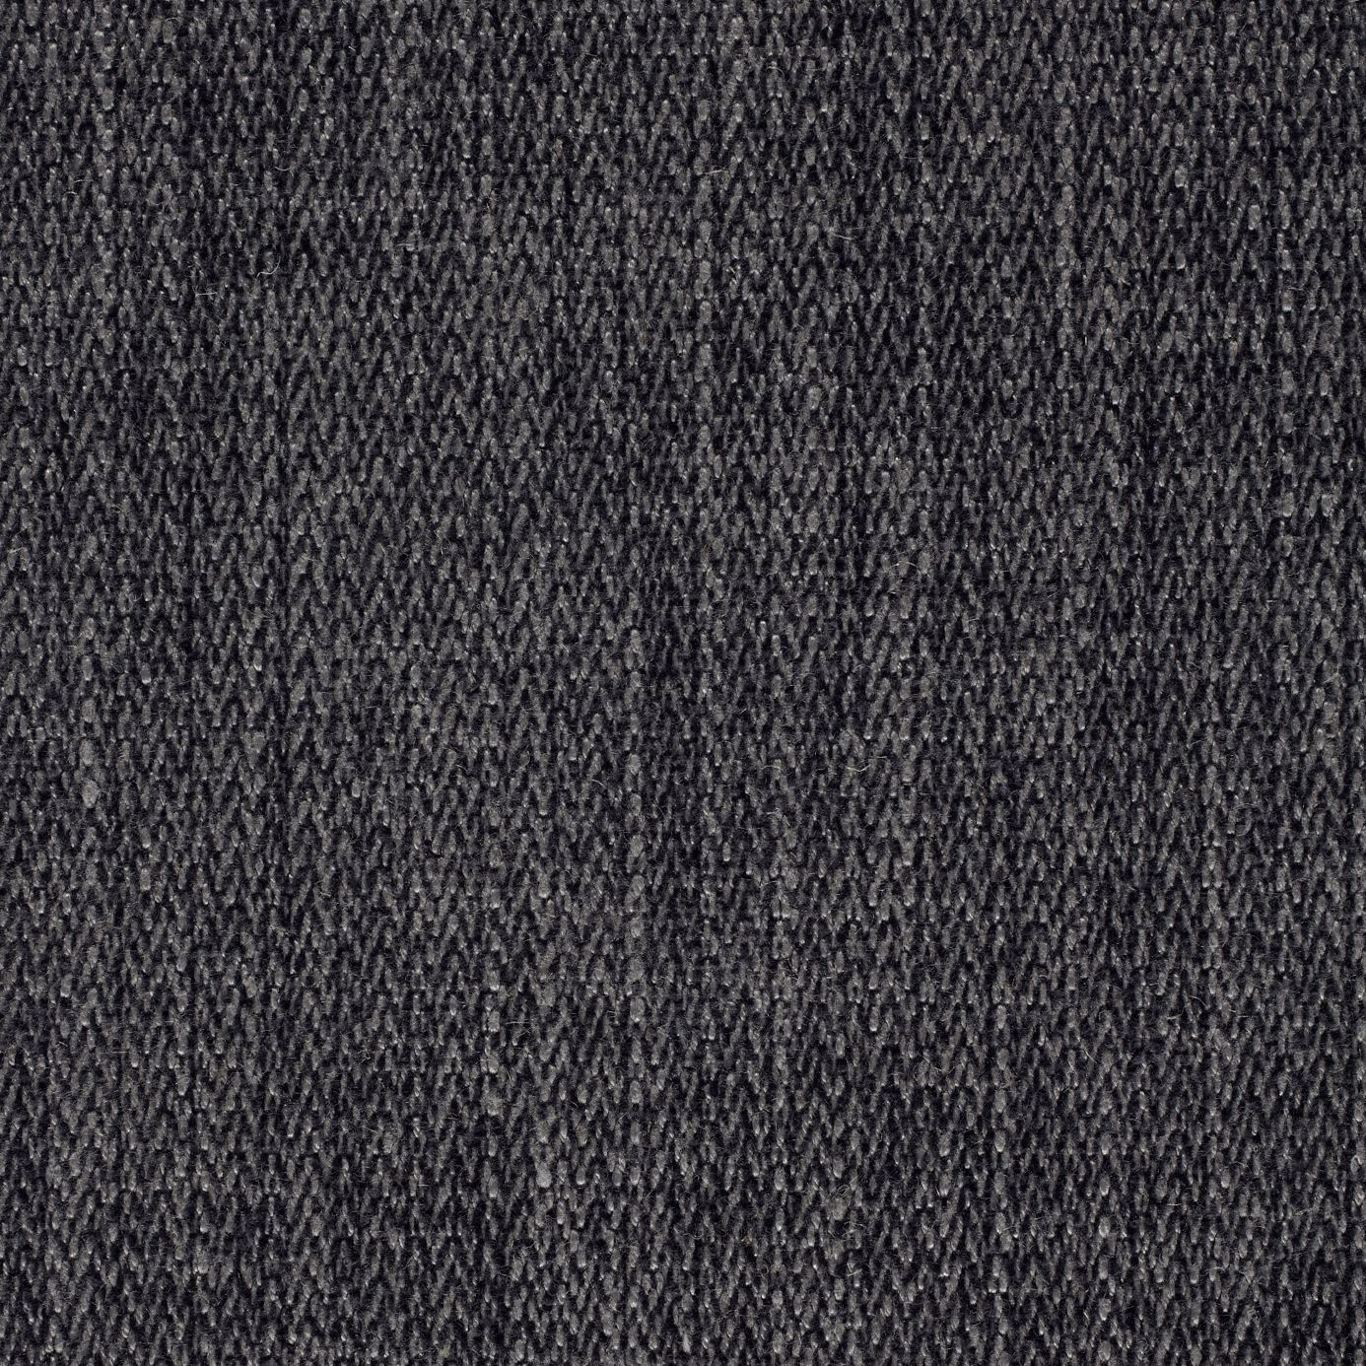 Audley Charcoal Fabric by ZOF